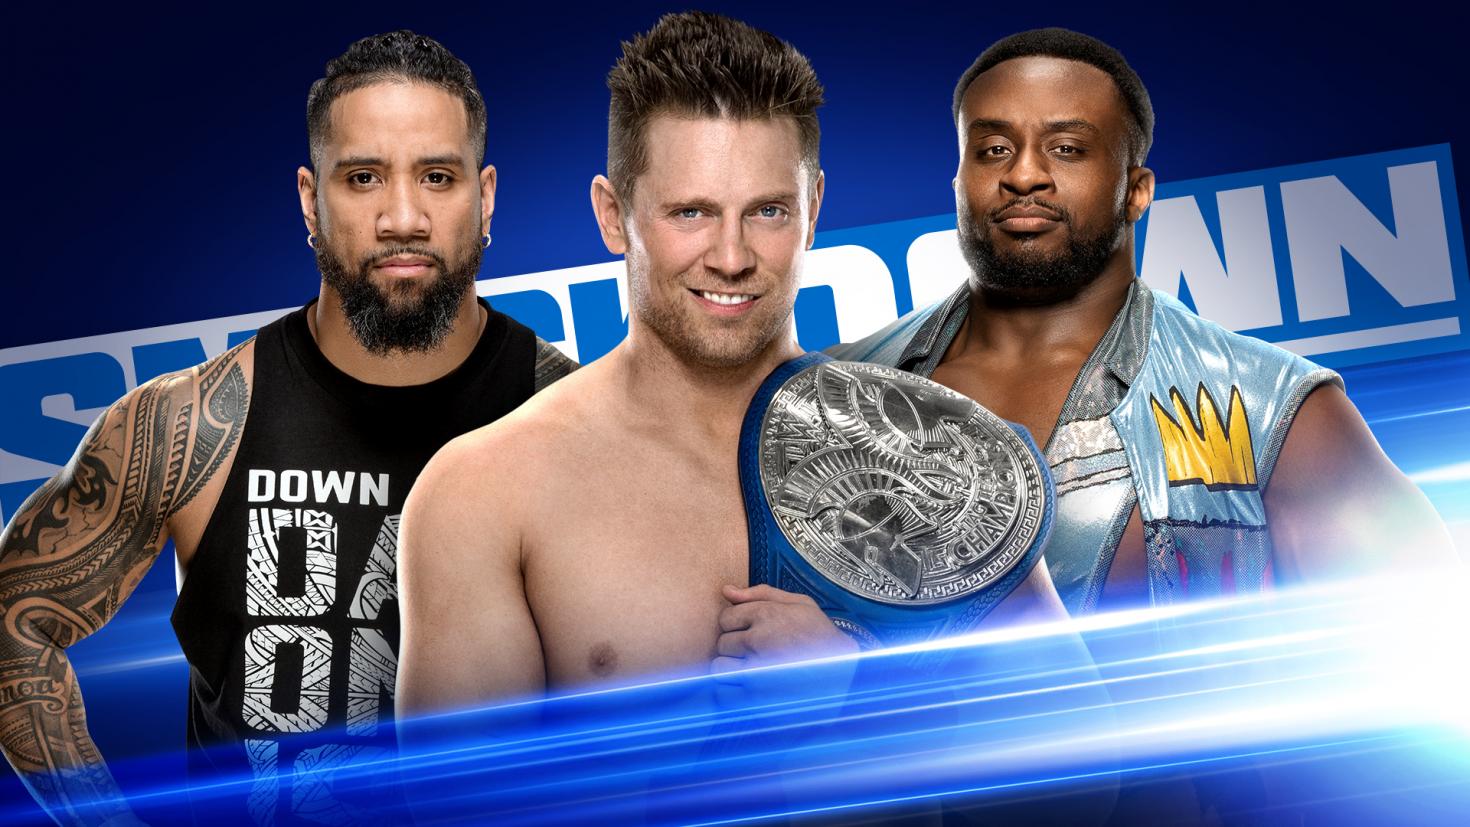 WWE Smackdown Preview and Predictions: April 17, 2020